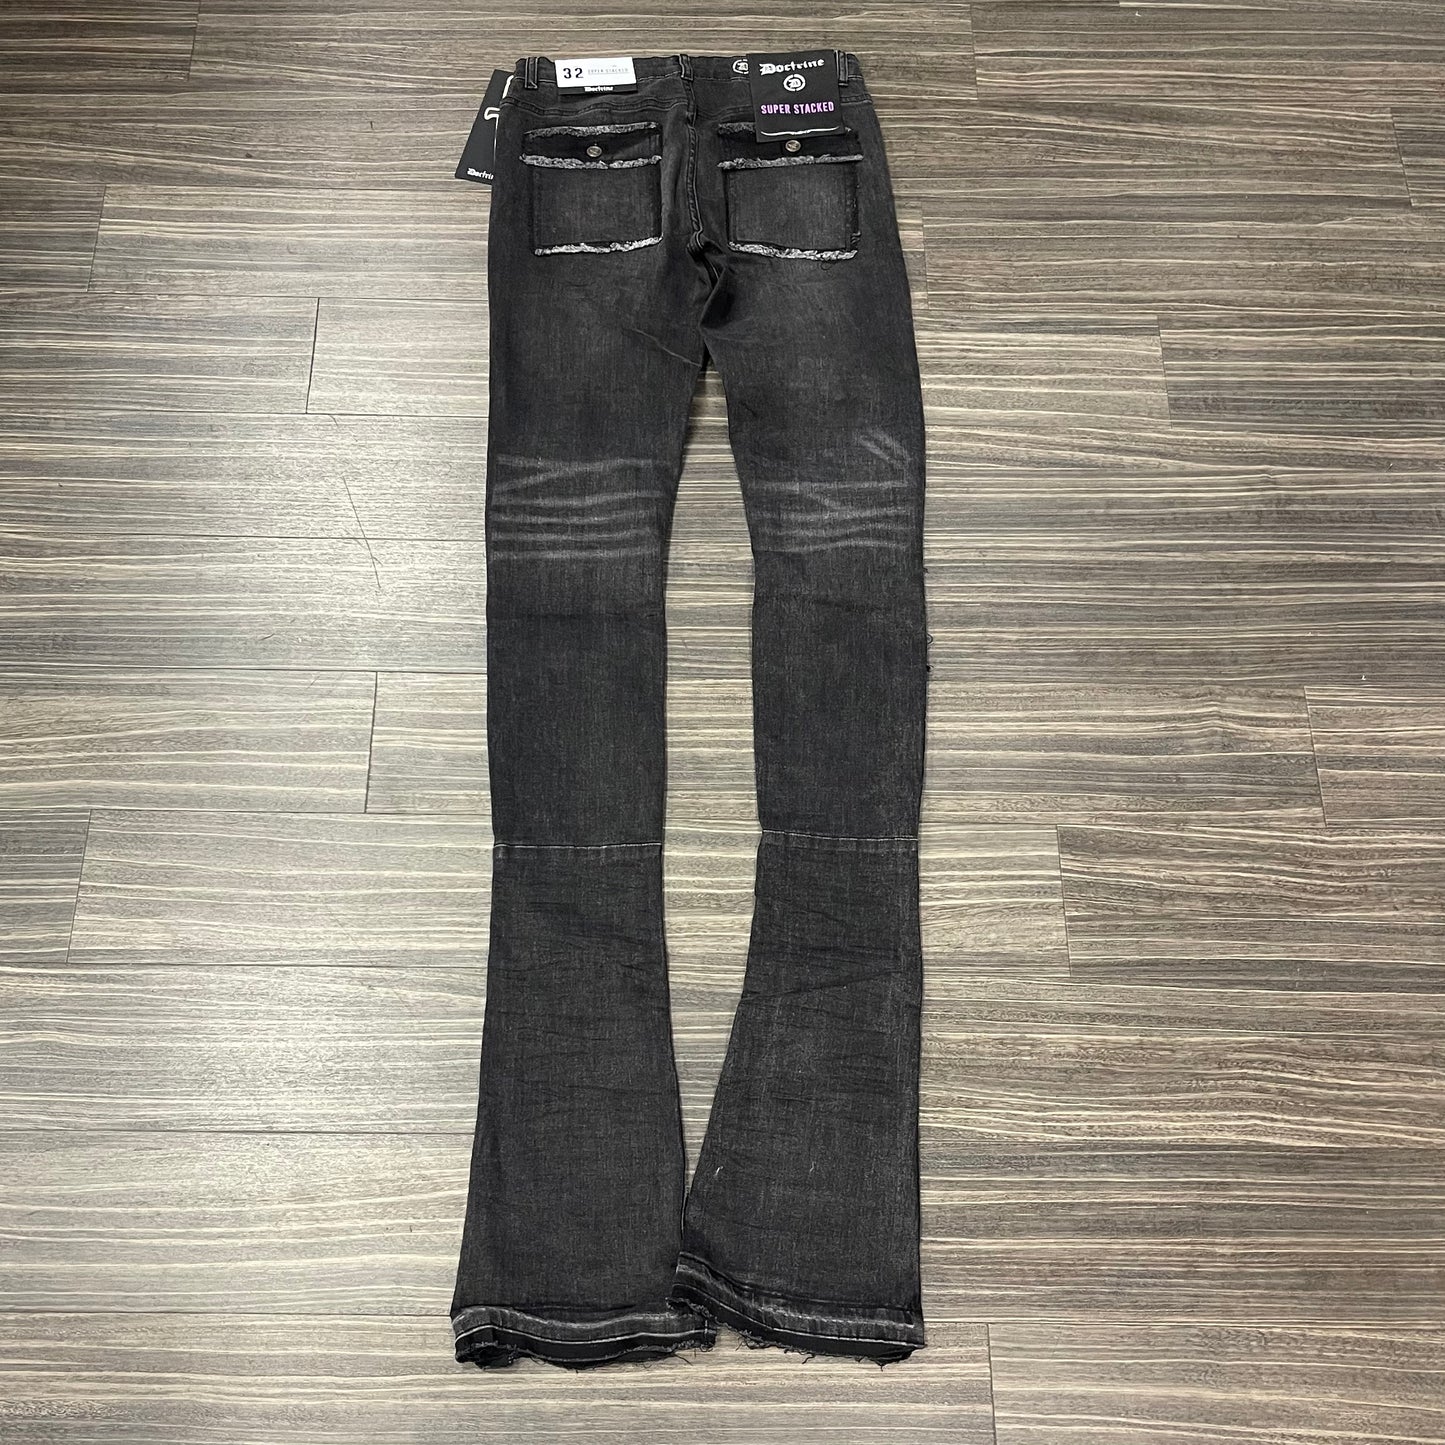 Savant Jeans Stacked BLK/Wash